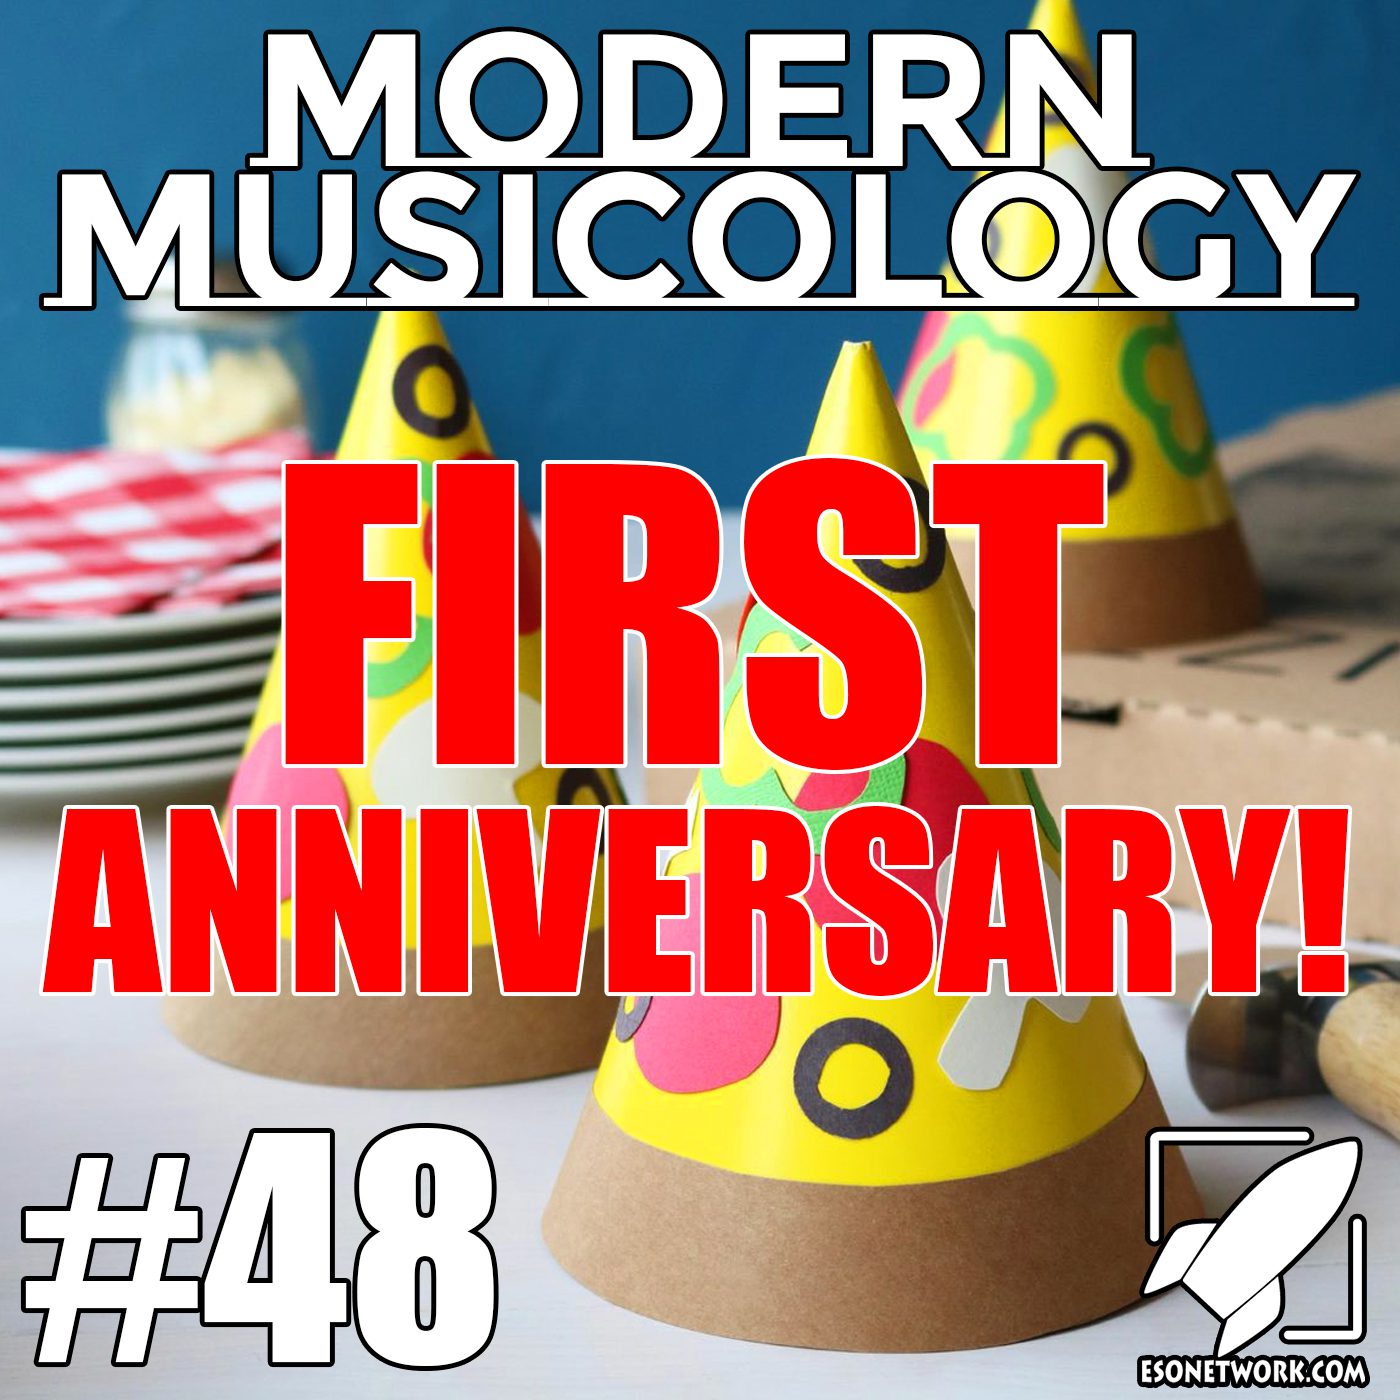 Modern Musicology #48 - Our First Anniversary